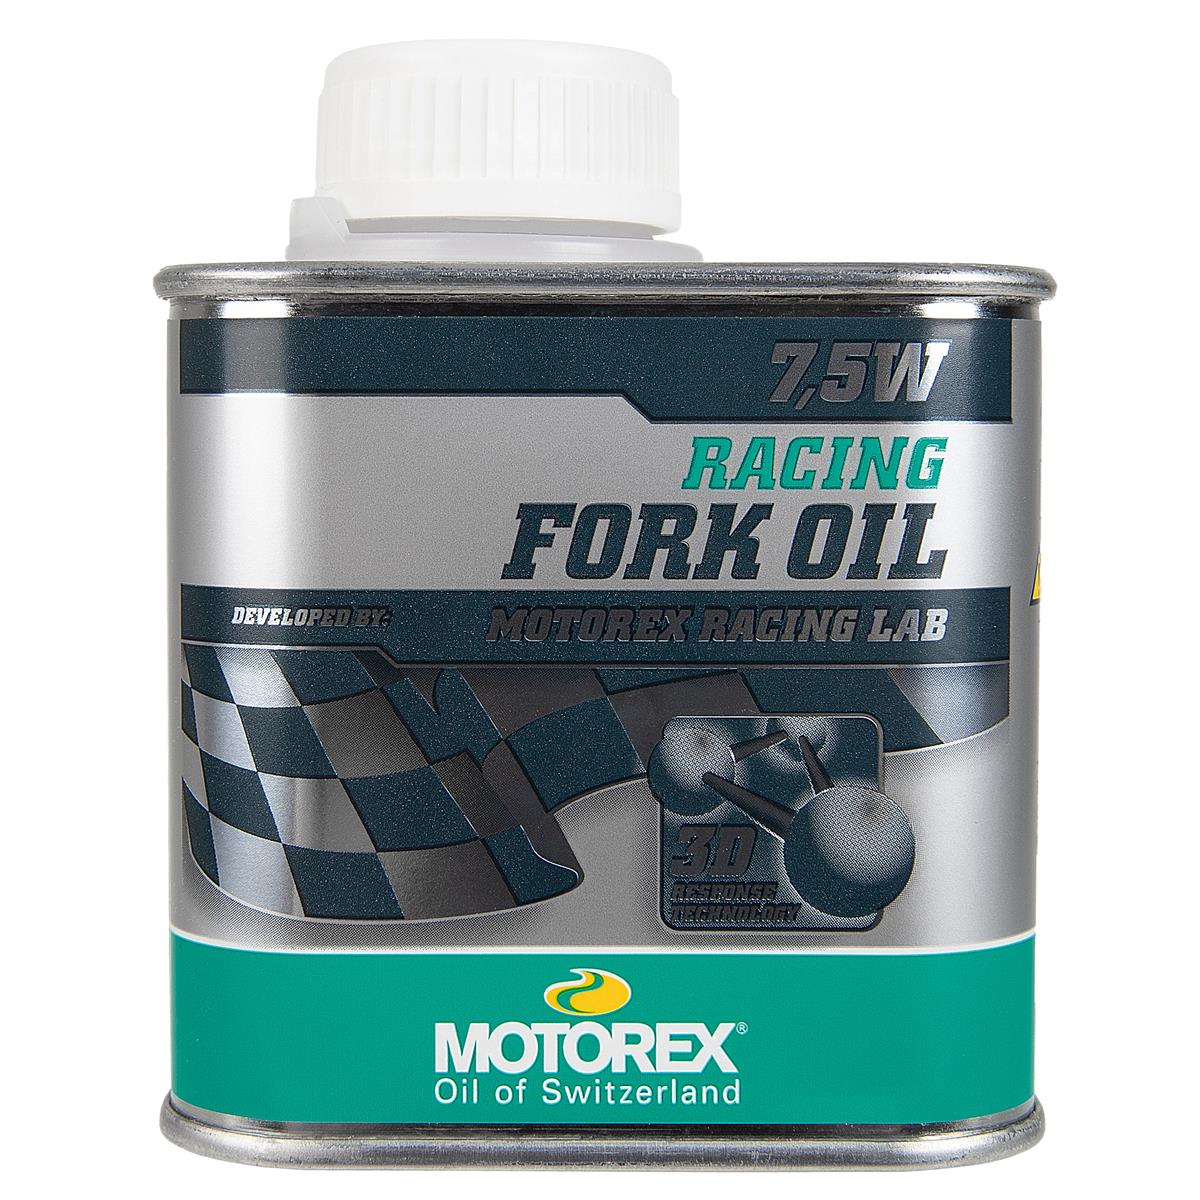 Motorex Olio Forcelle Racing 7.5 W, 250 ml